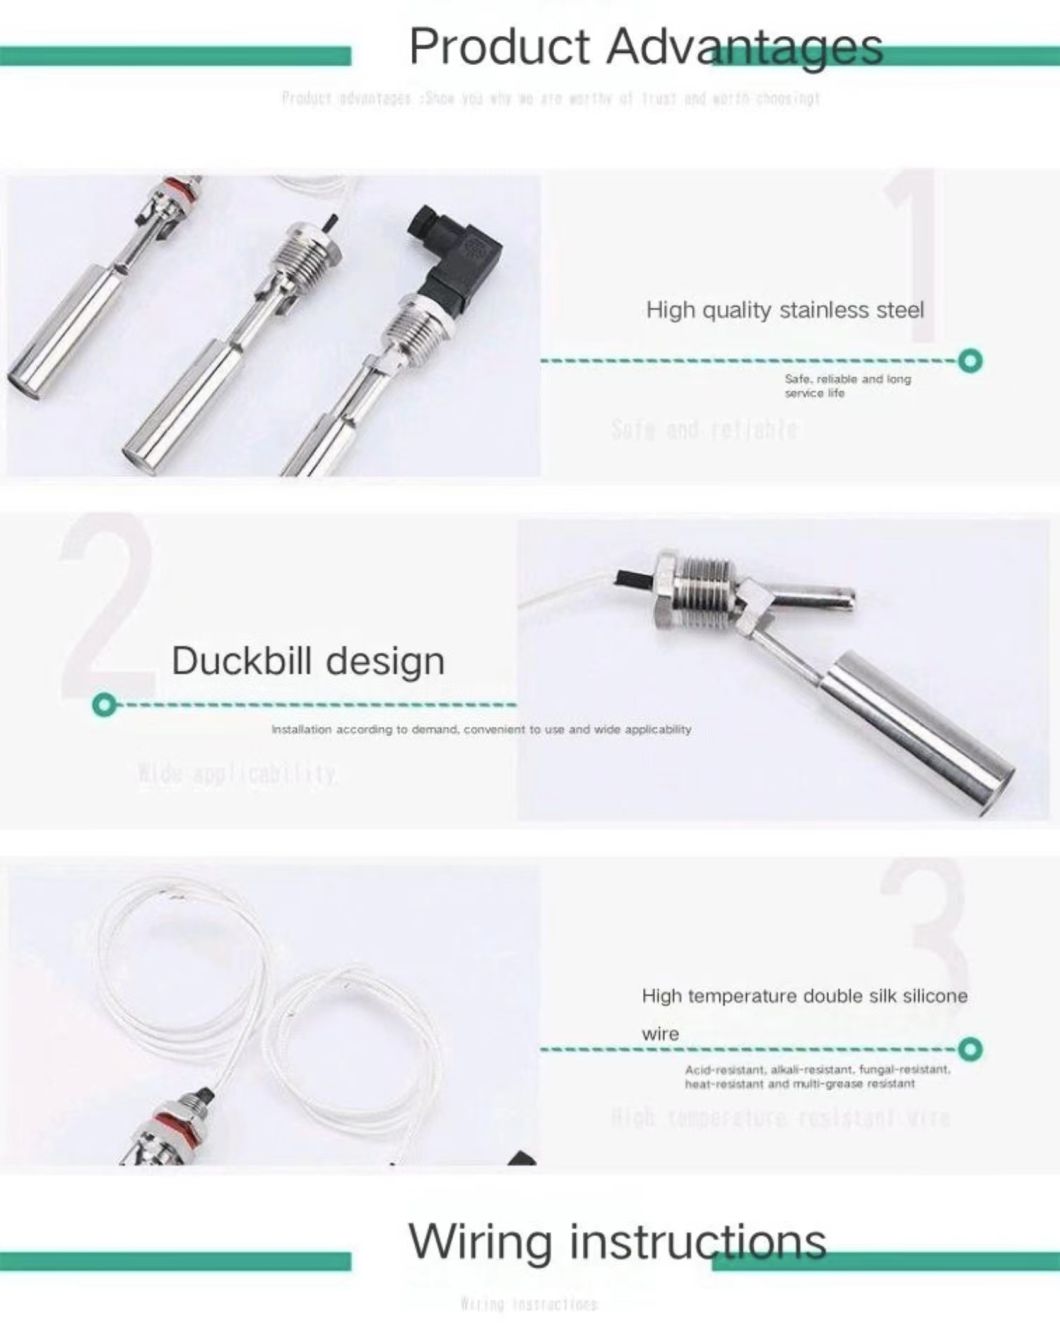 Duck Billed Small Stainless Steel Side Mounted Float Switch, Liquid Level Controller, Liquid Level Switch